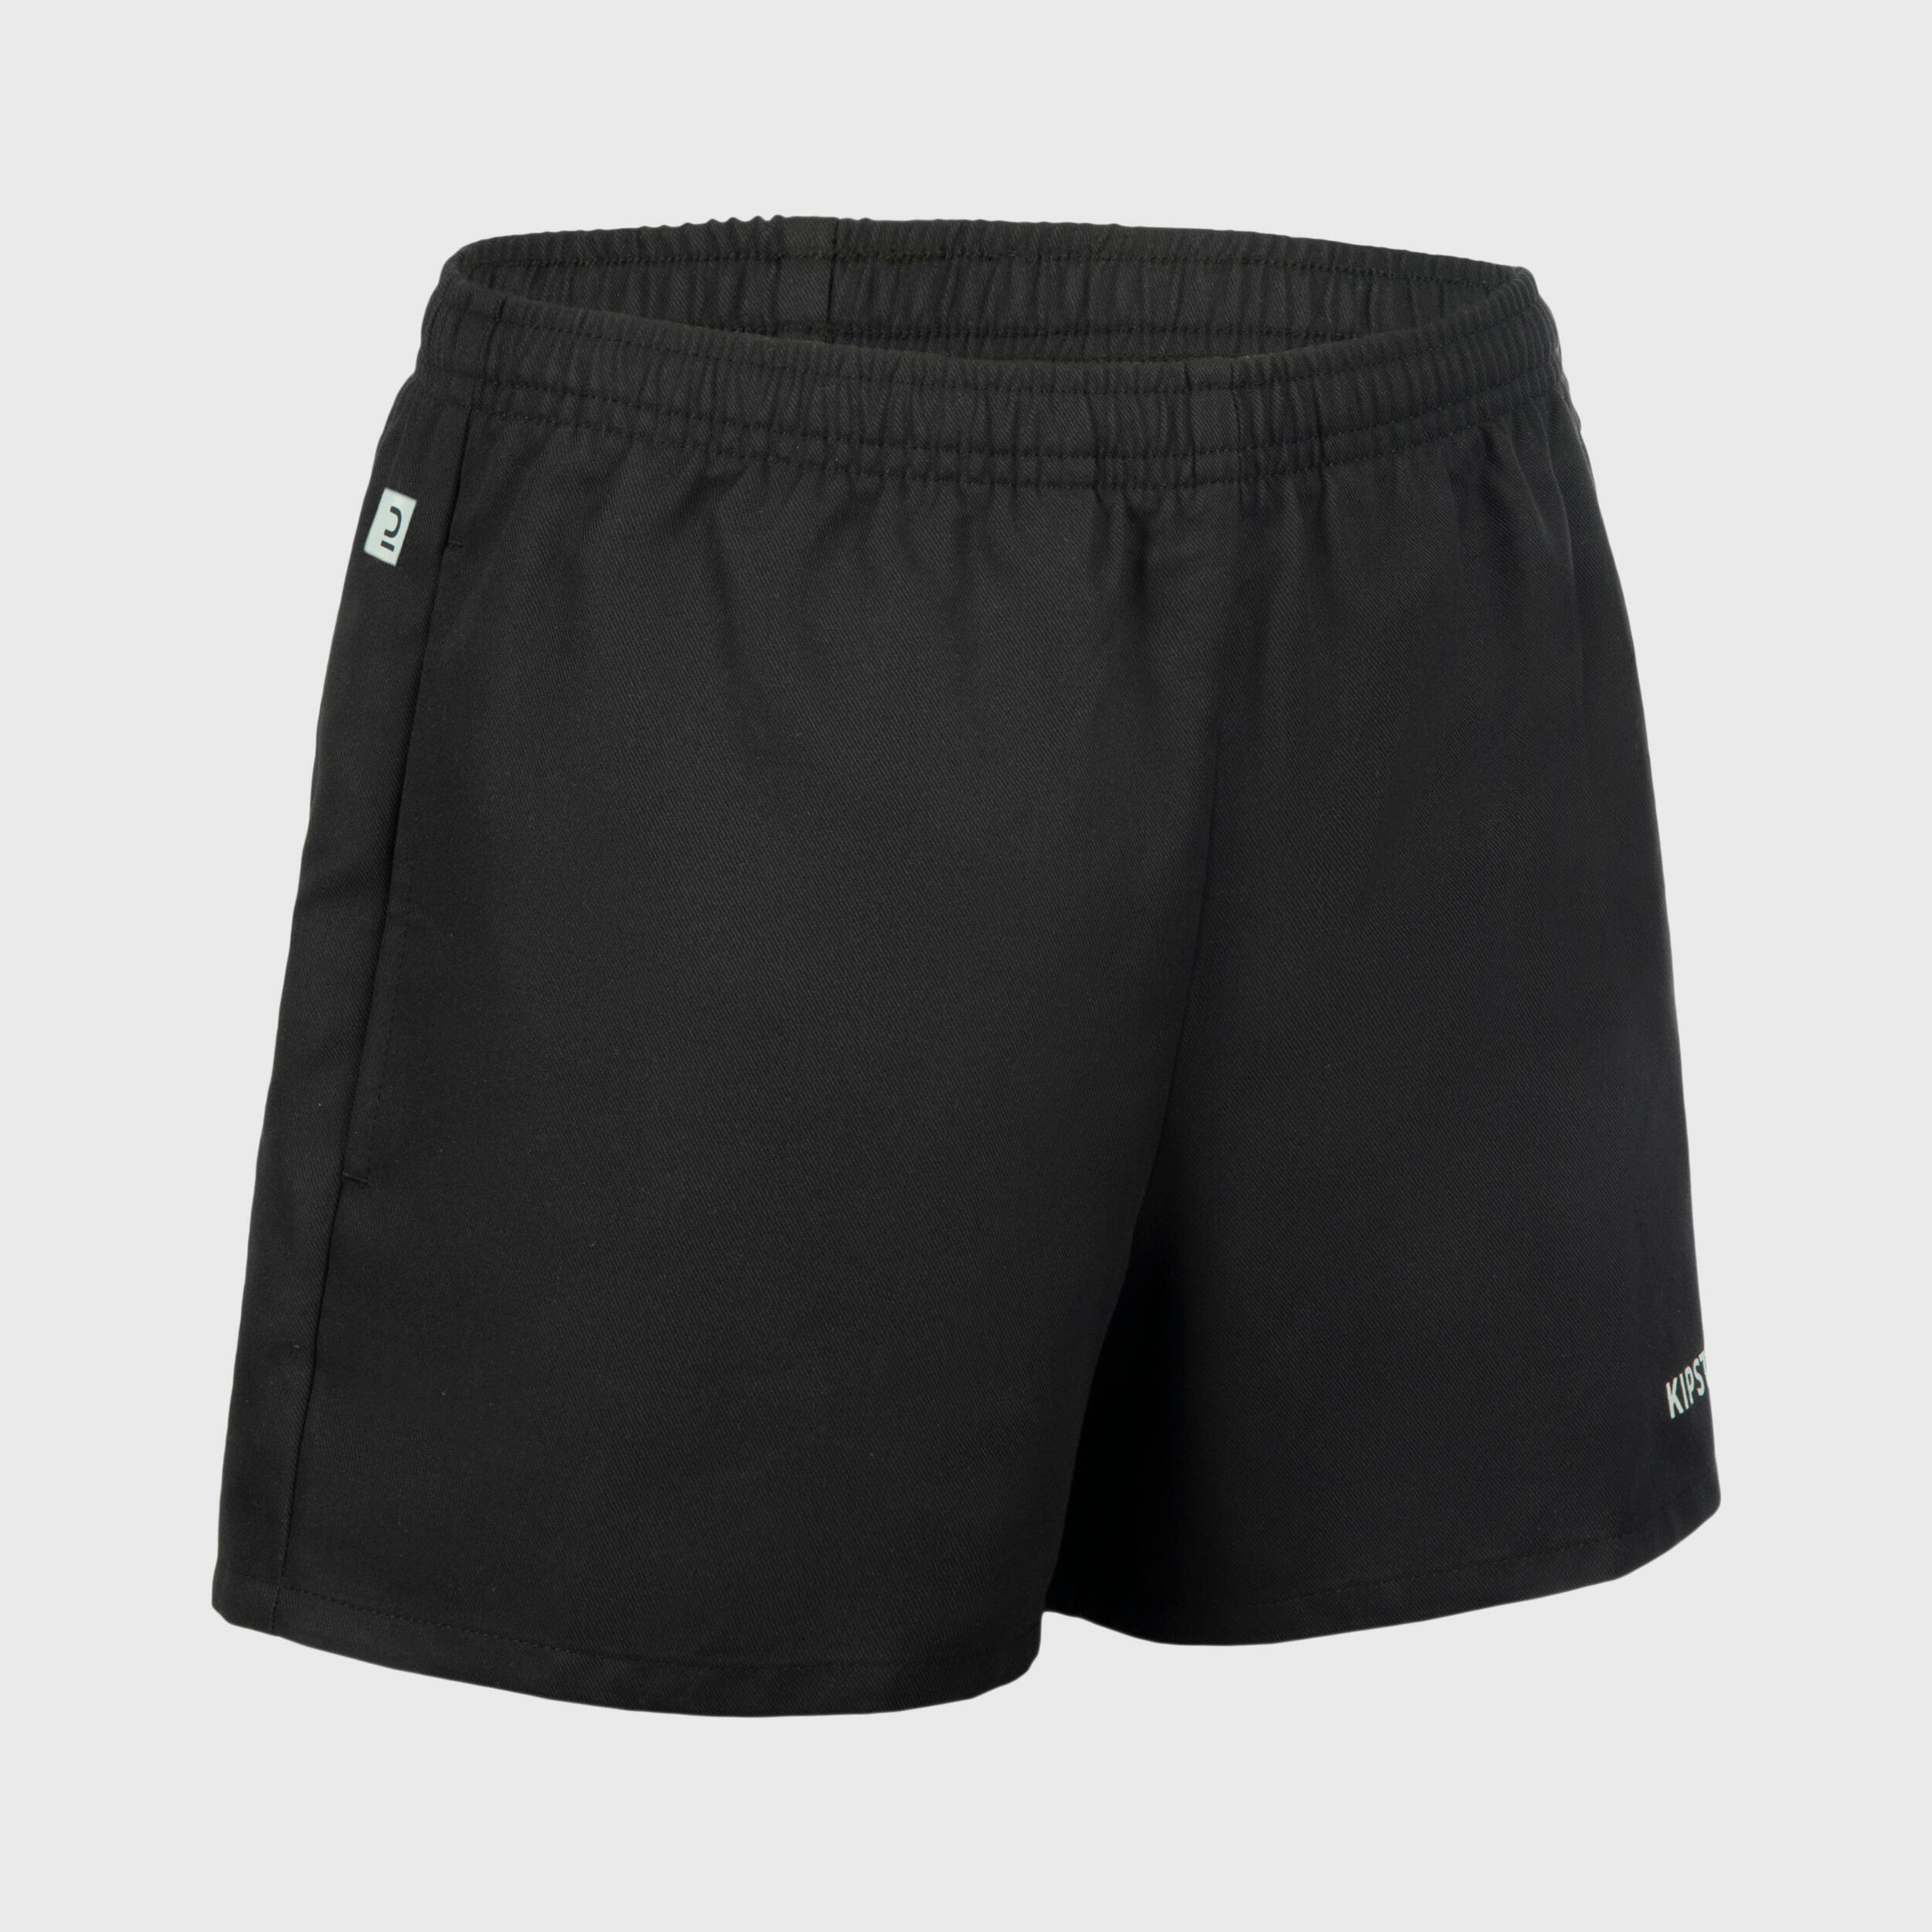 OFFLOAD Adult Rugby Shorts with Pockets R100 - Black